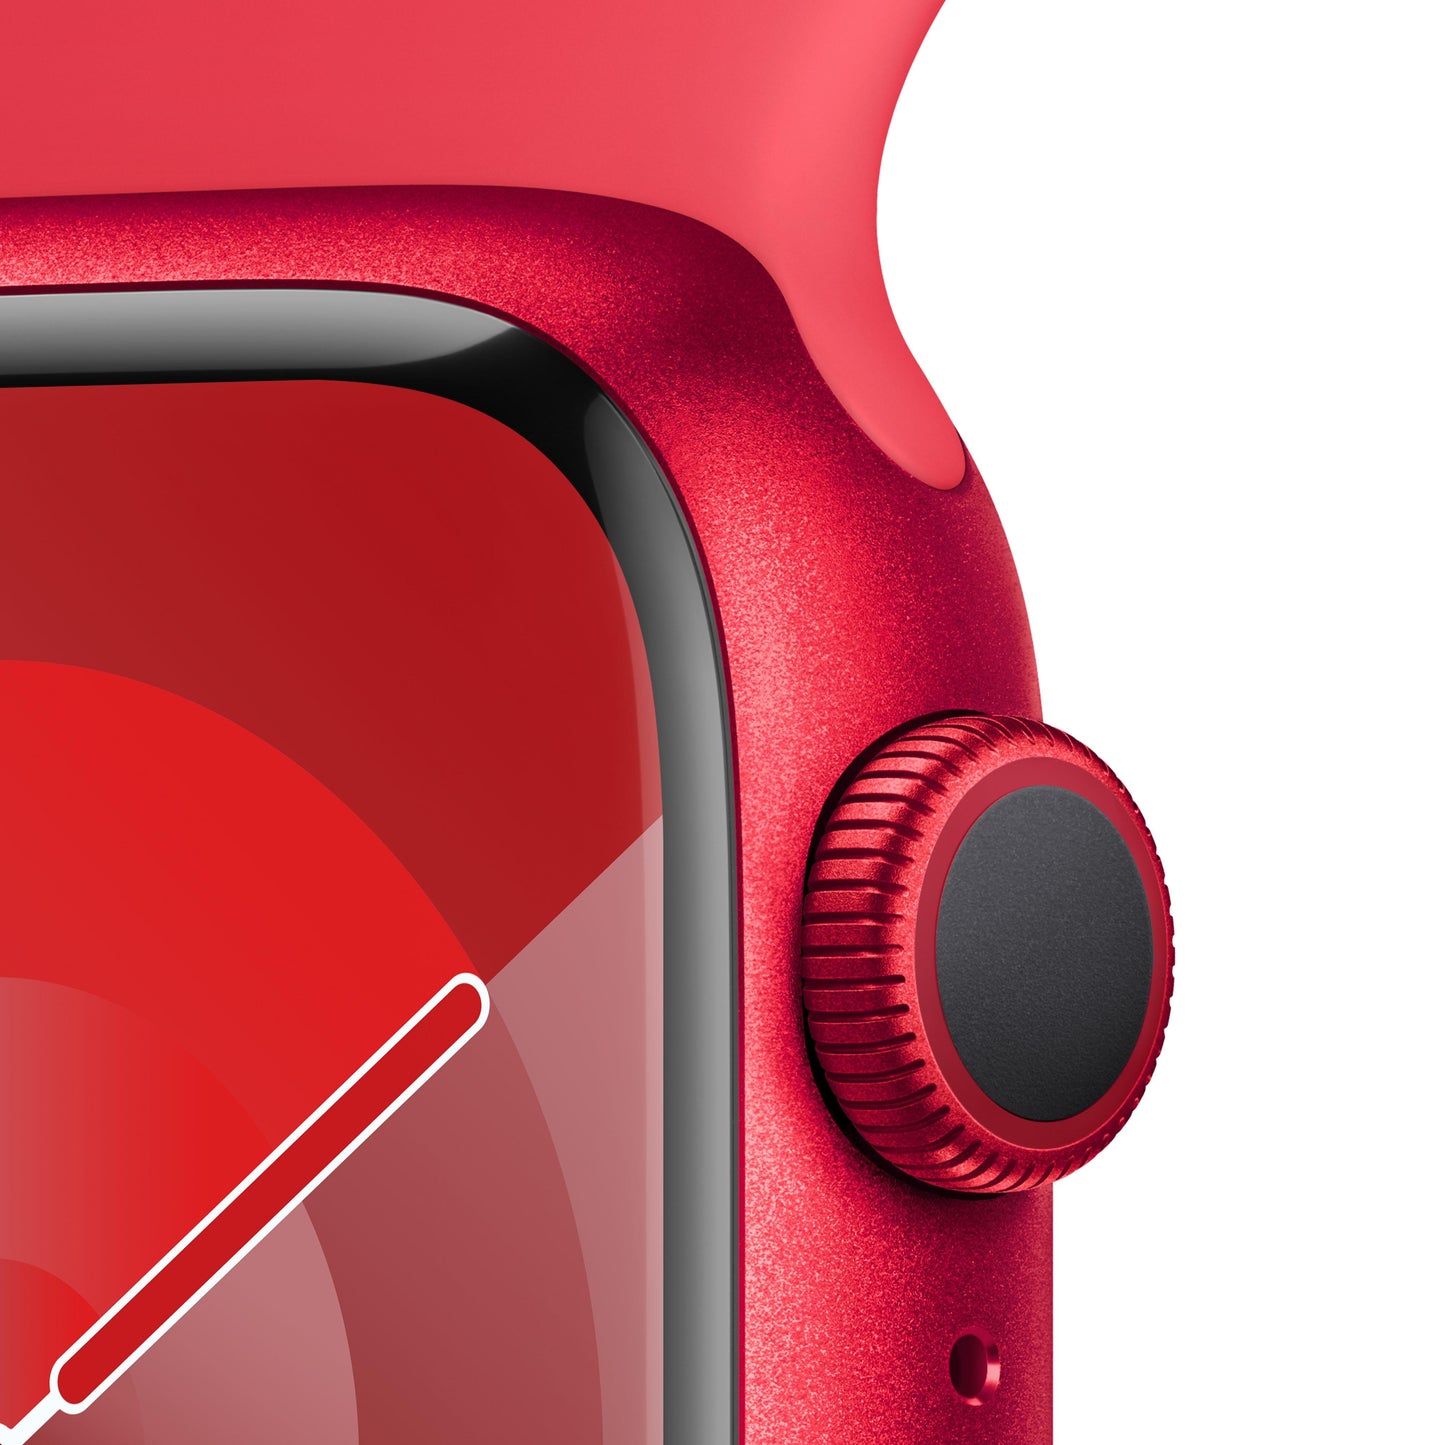 Apple Watch Series 9 GPS 41mm (PRODUCT)RED Alum Case w/ (PRODUCT)RED Sport Band - S/M